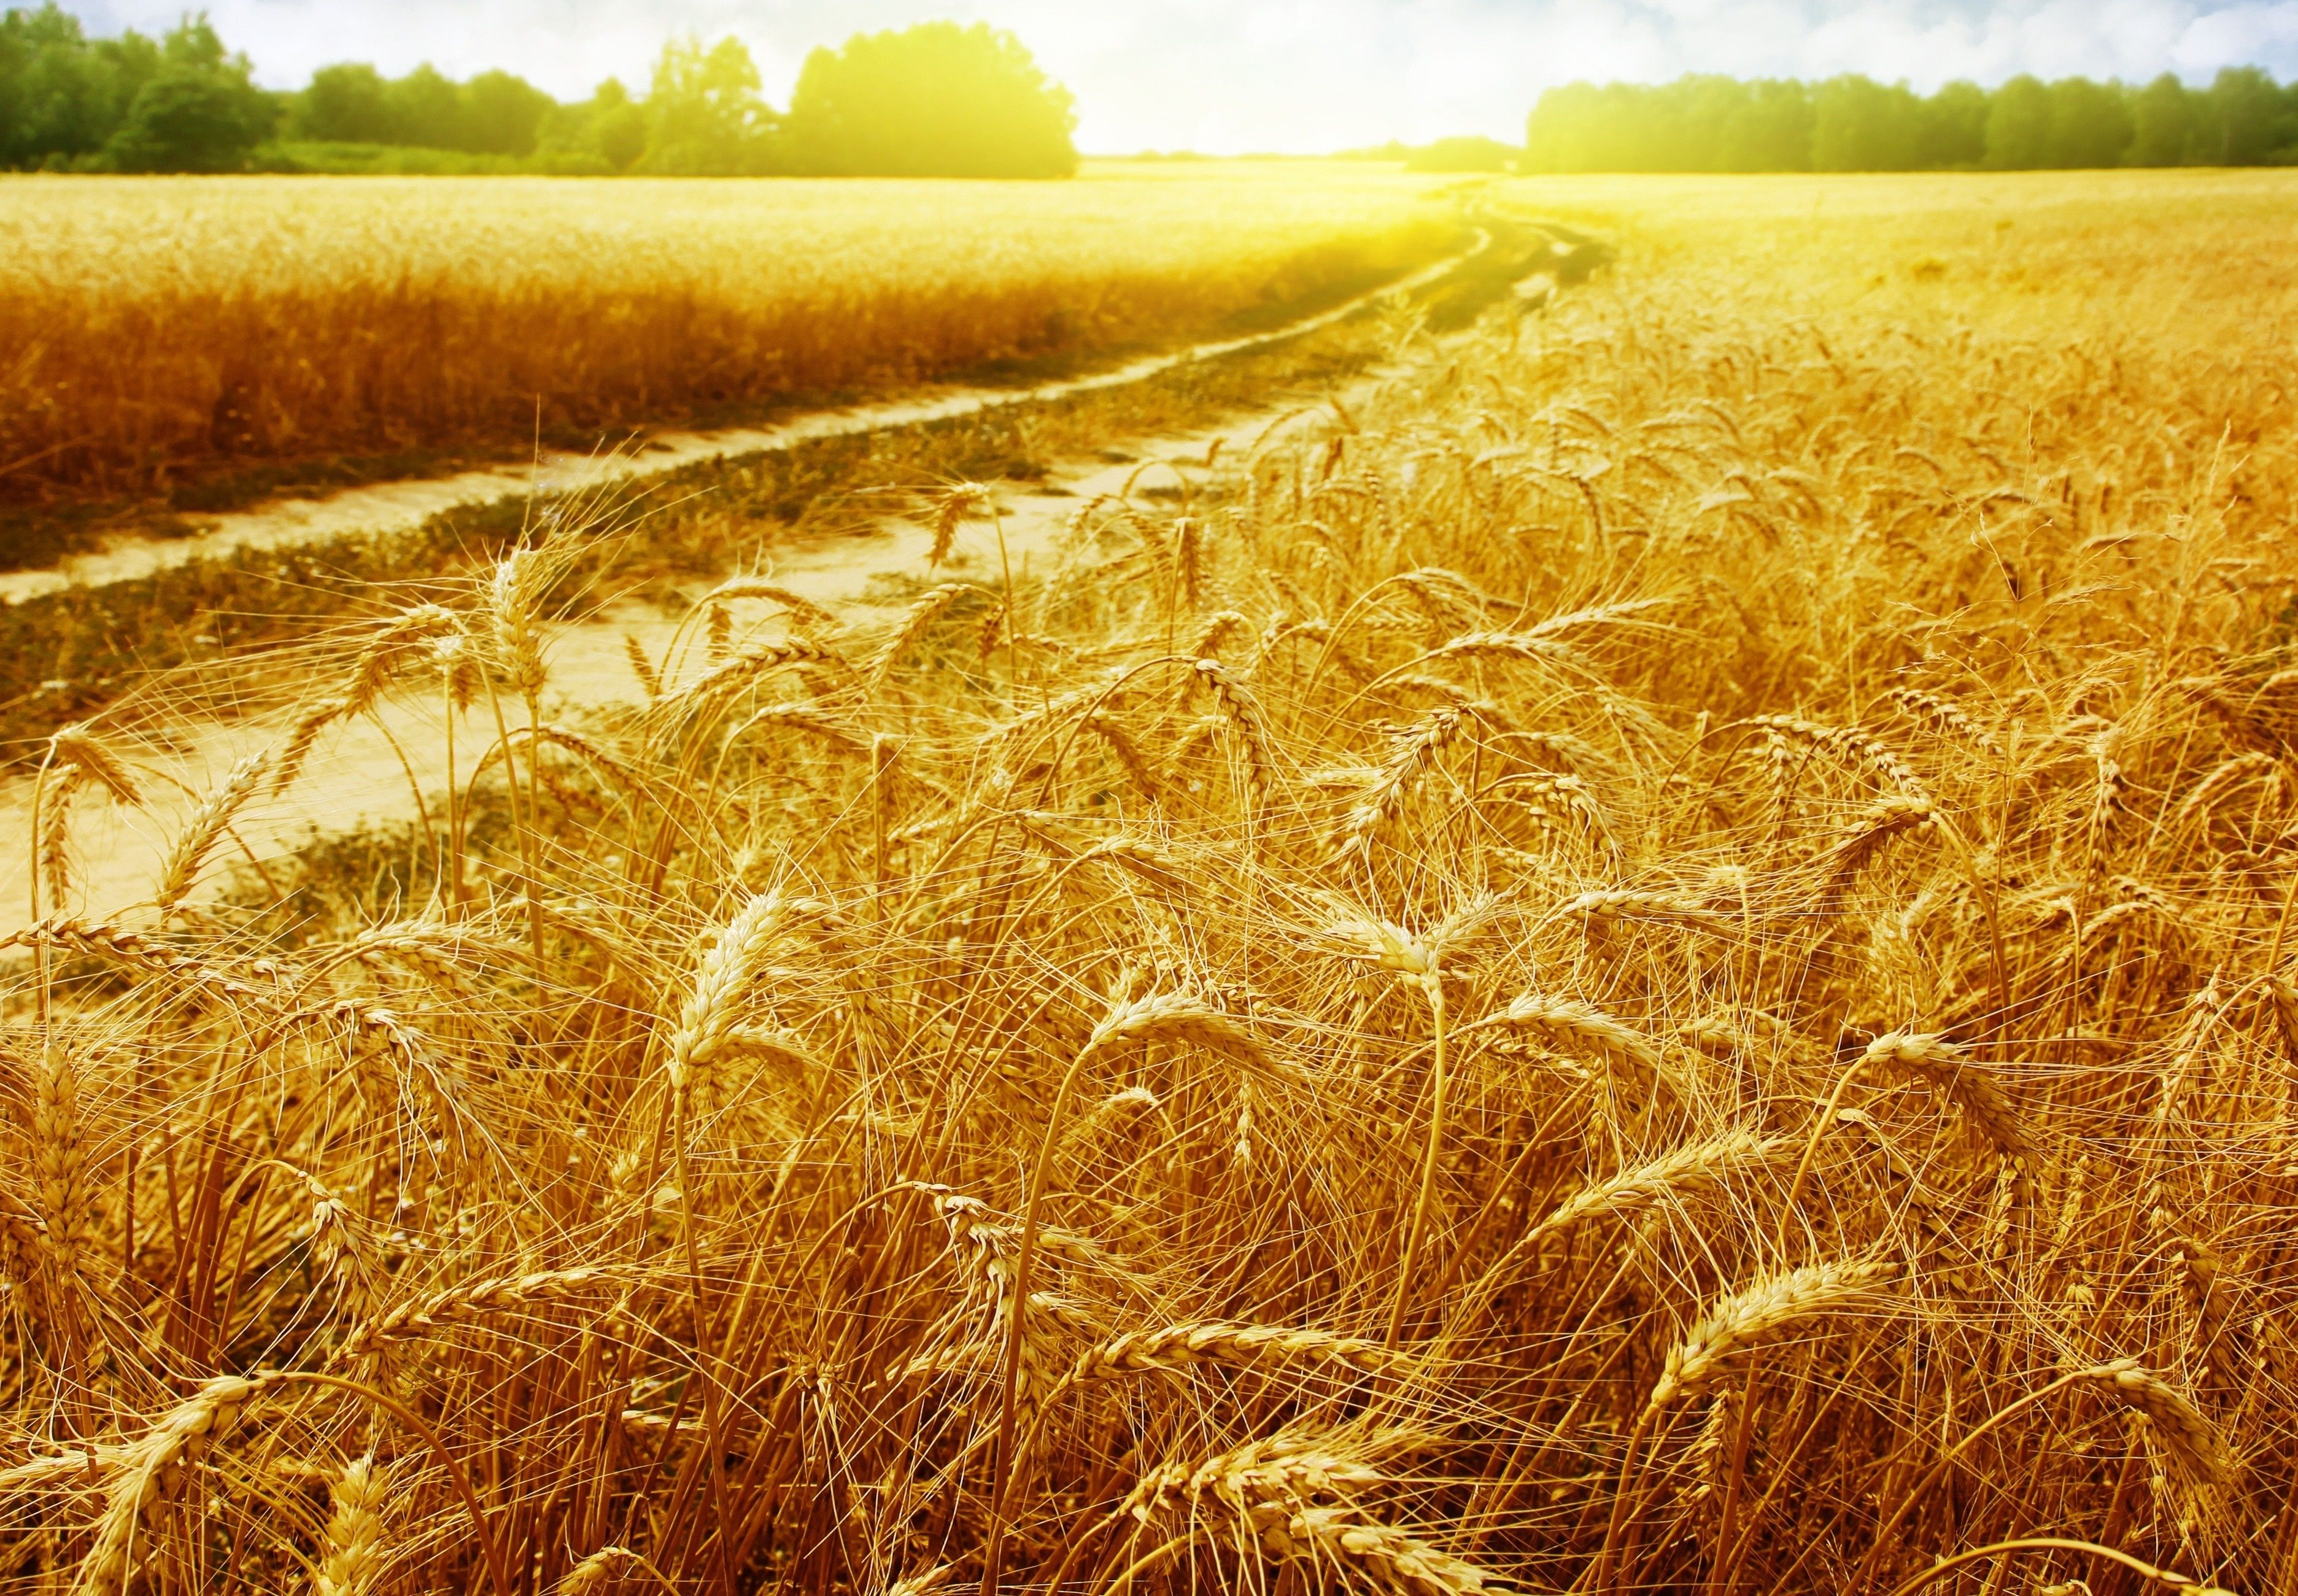 Wallpaper. Beautiful picture. photo. picture. field, wheat